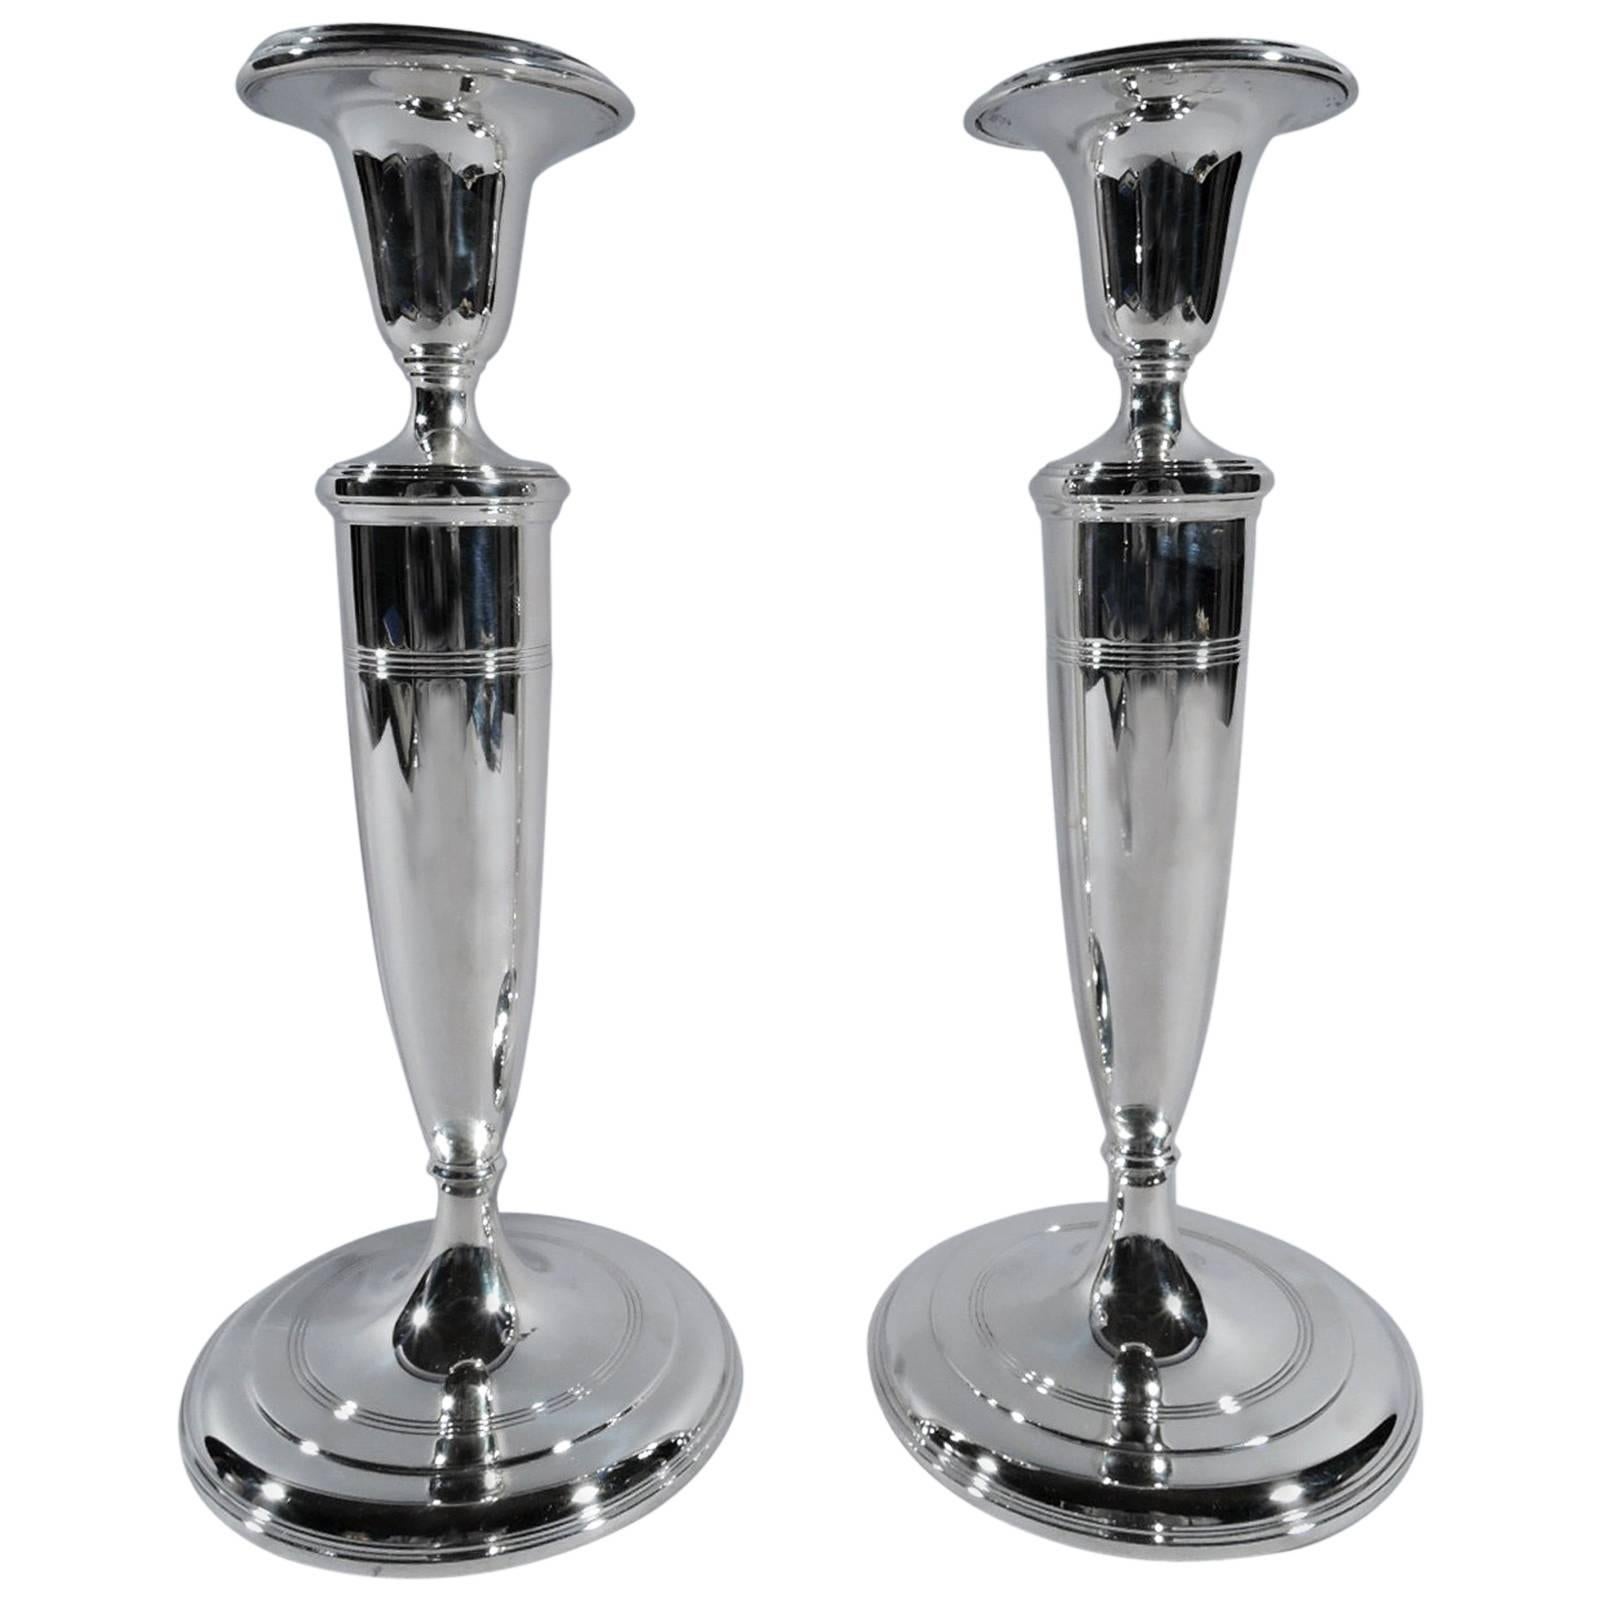 Pair of Tiffany Modern Classic Sterling Silver Candlesticks